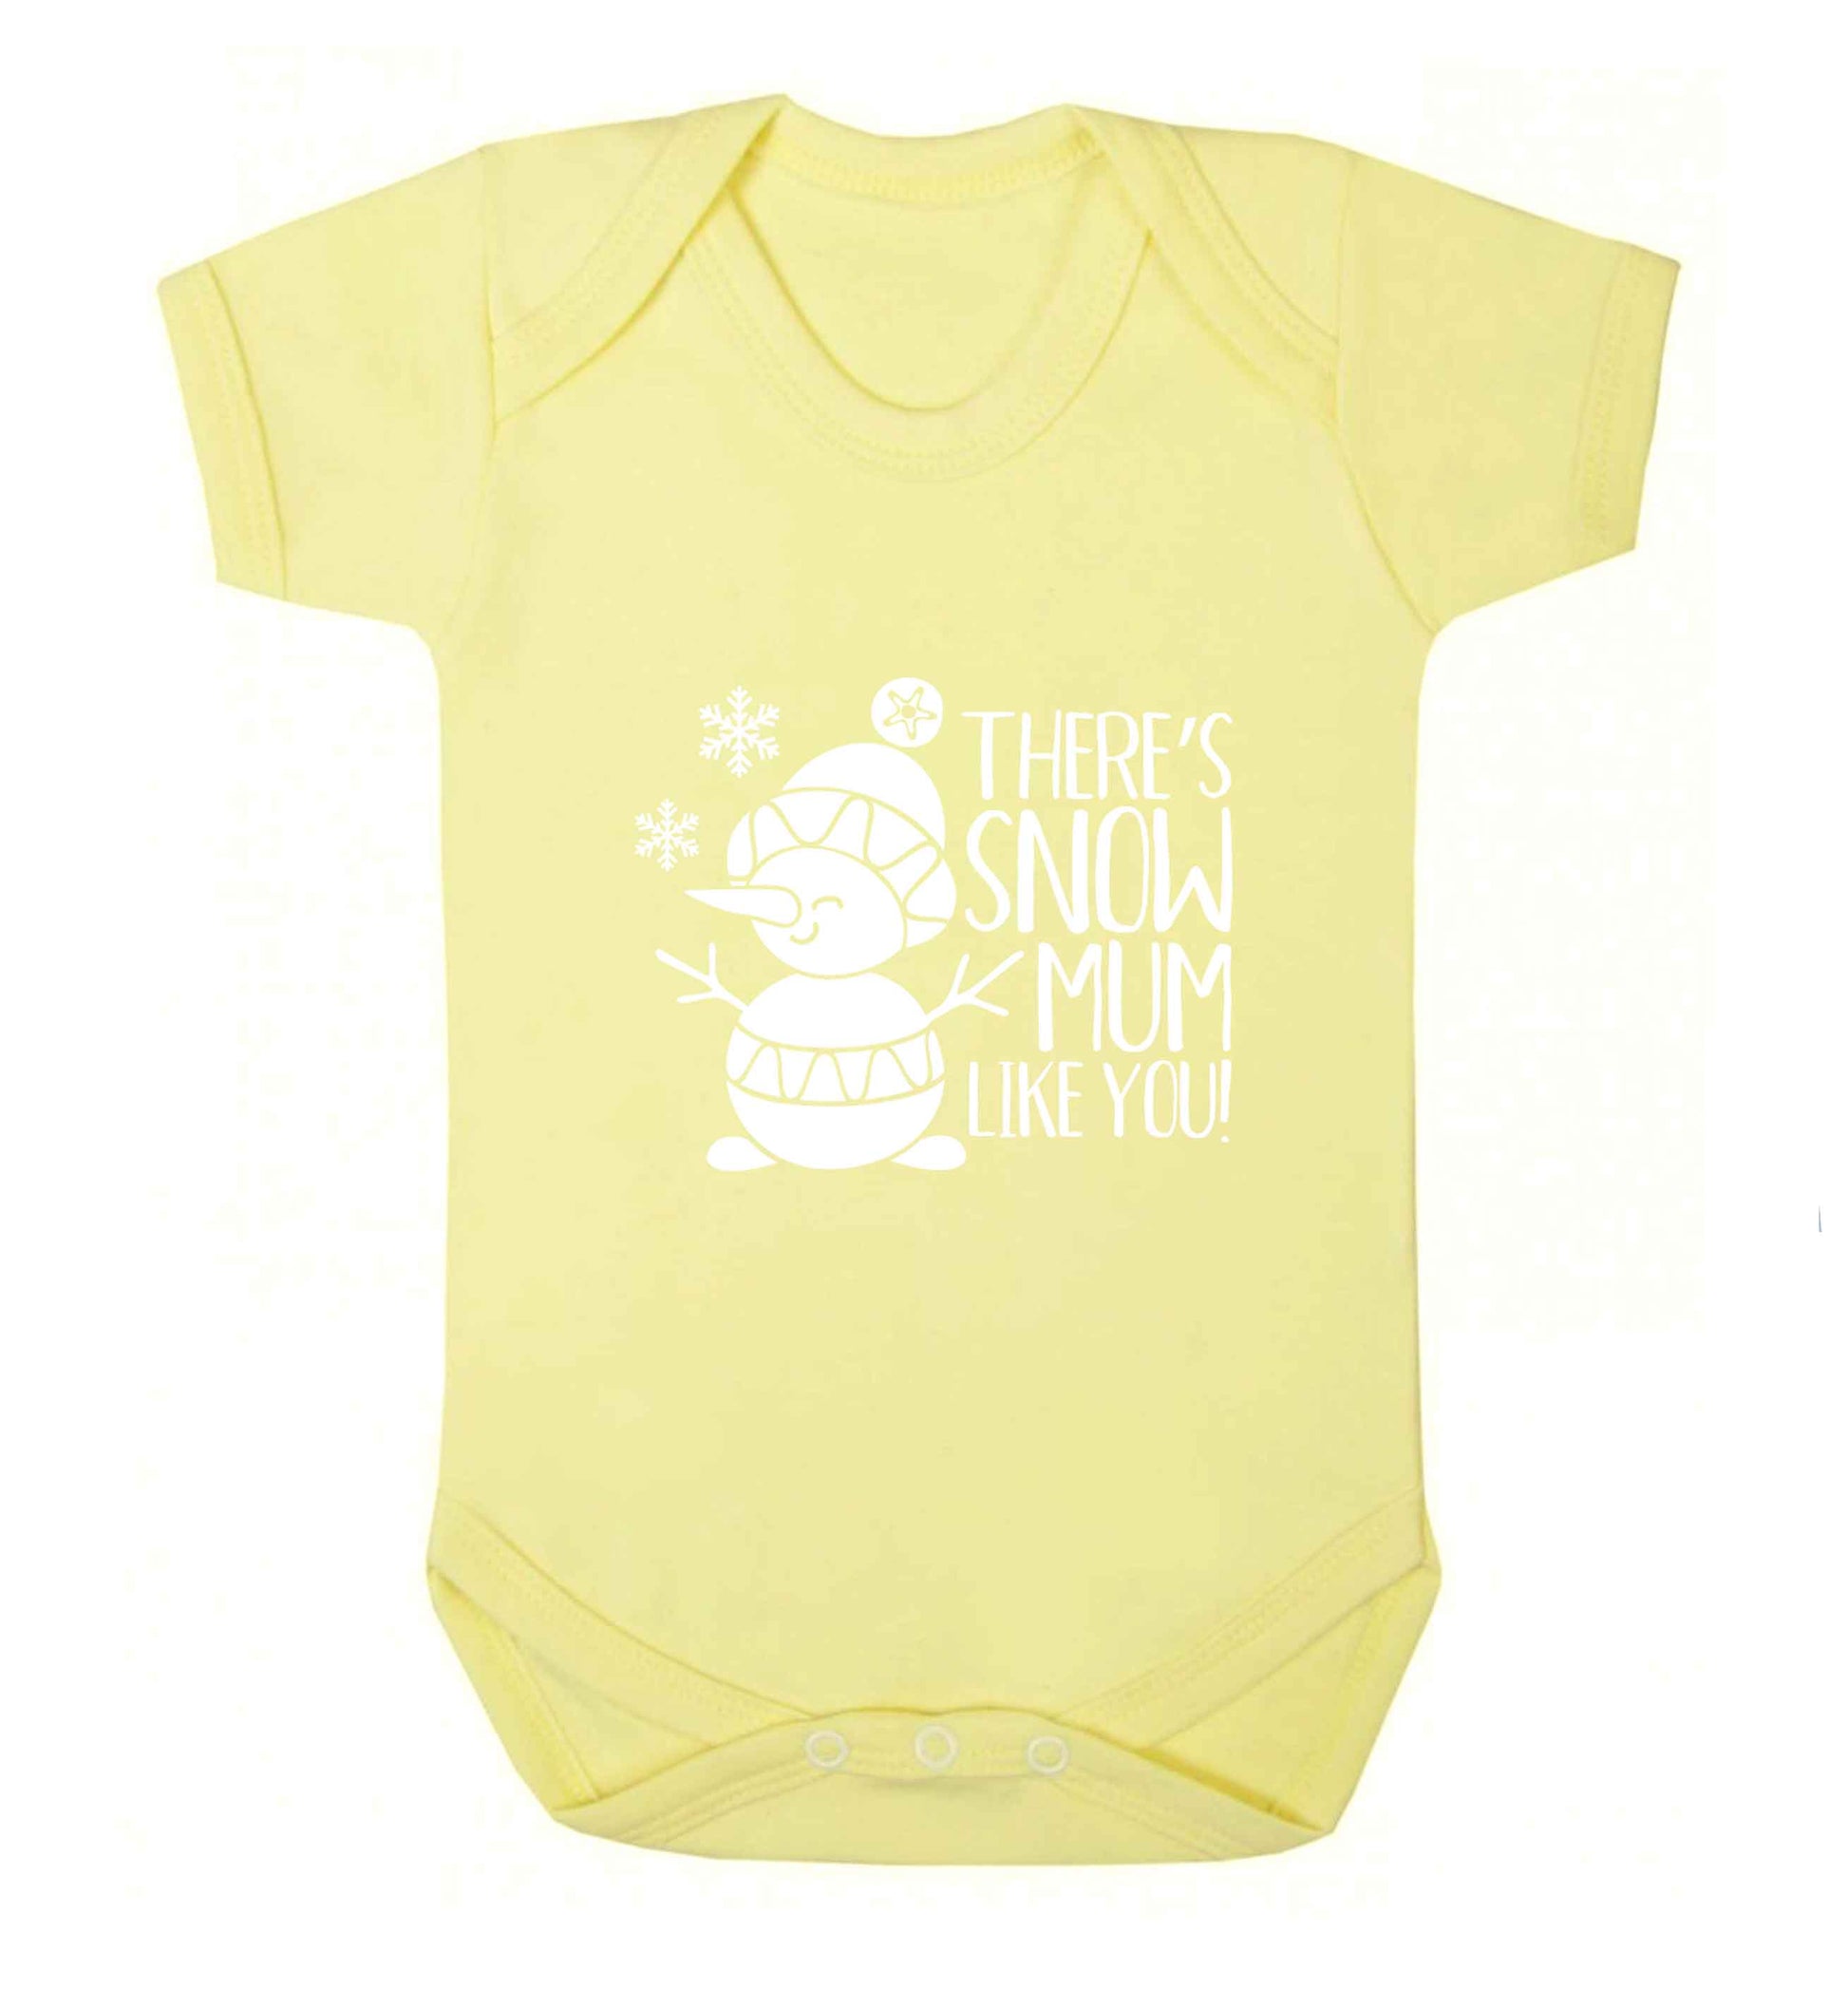 There's snow mum like you baby vest pale yellow 18-24 months